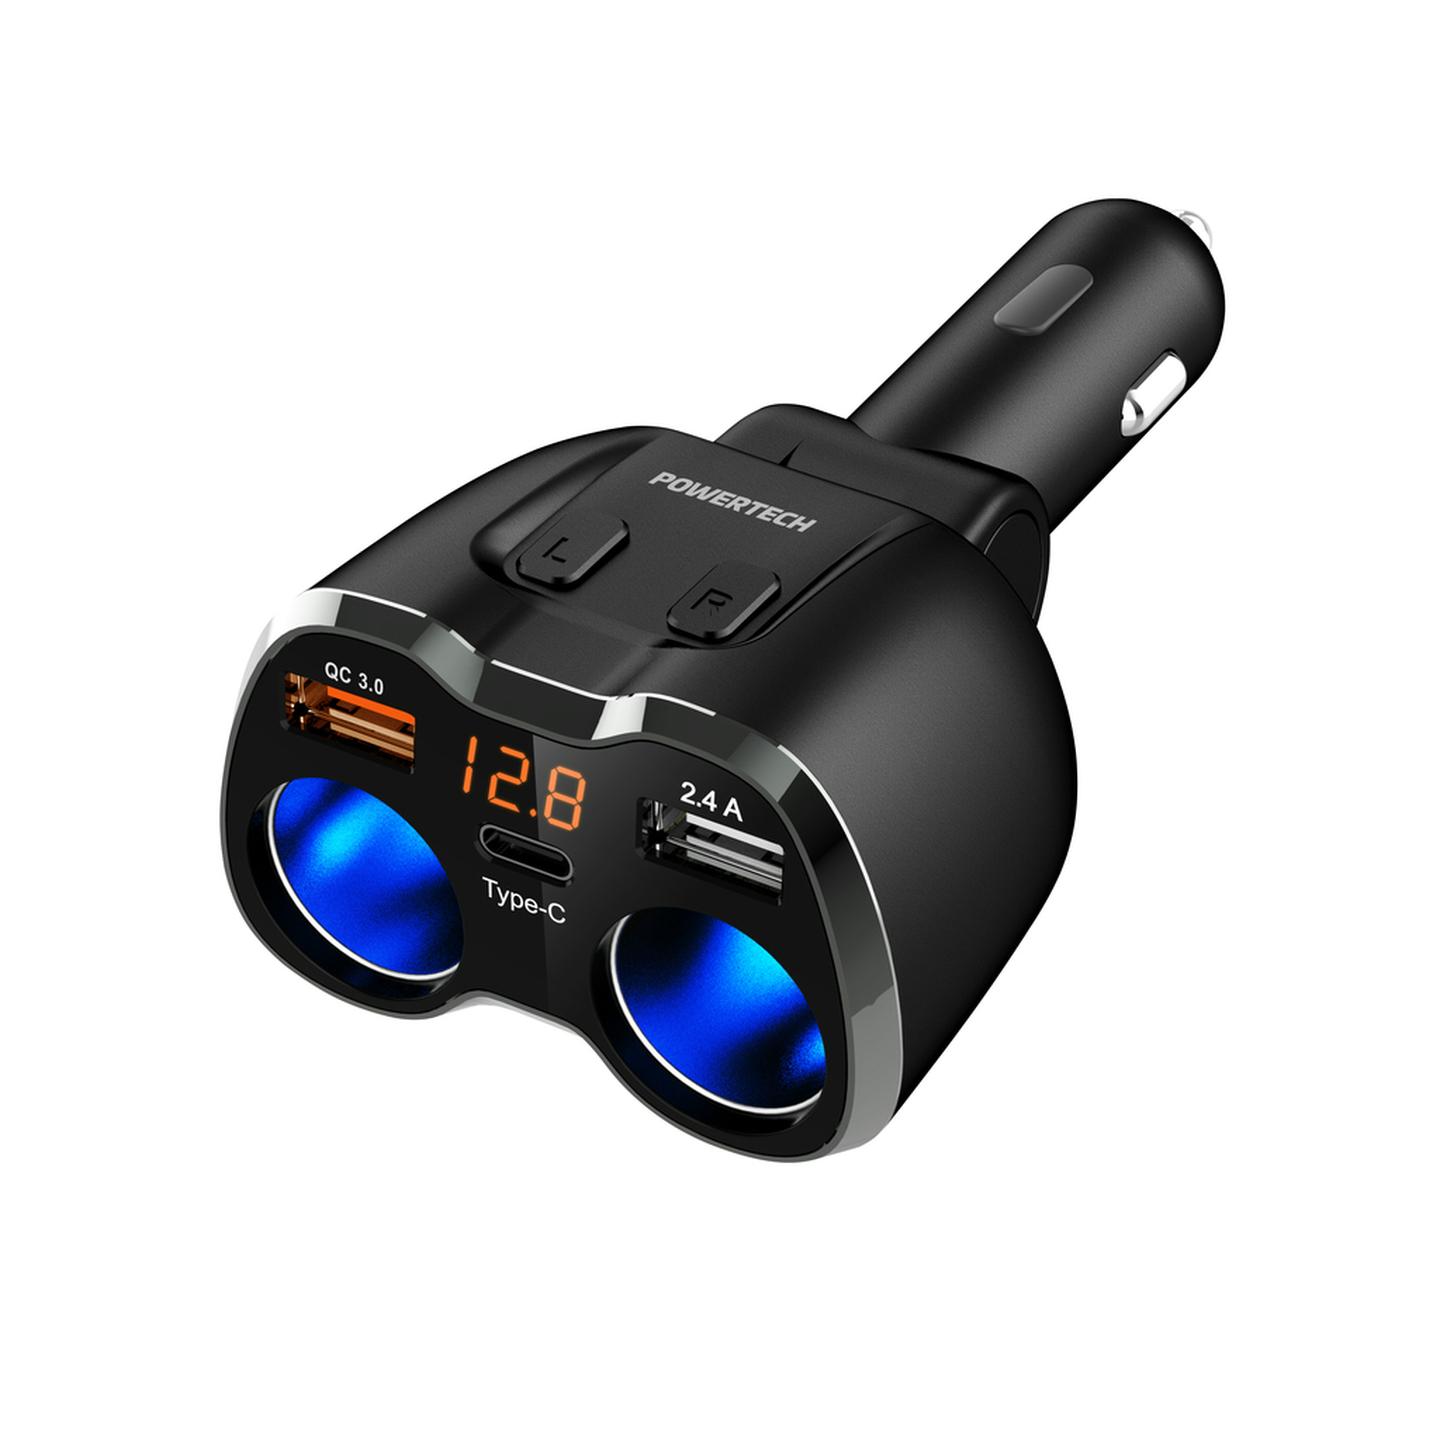 Dual Car Cigarette Lighter Adaptor with 3 x USB Charging Ports and Voltmeter